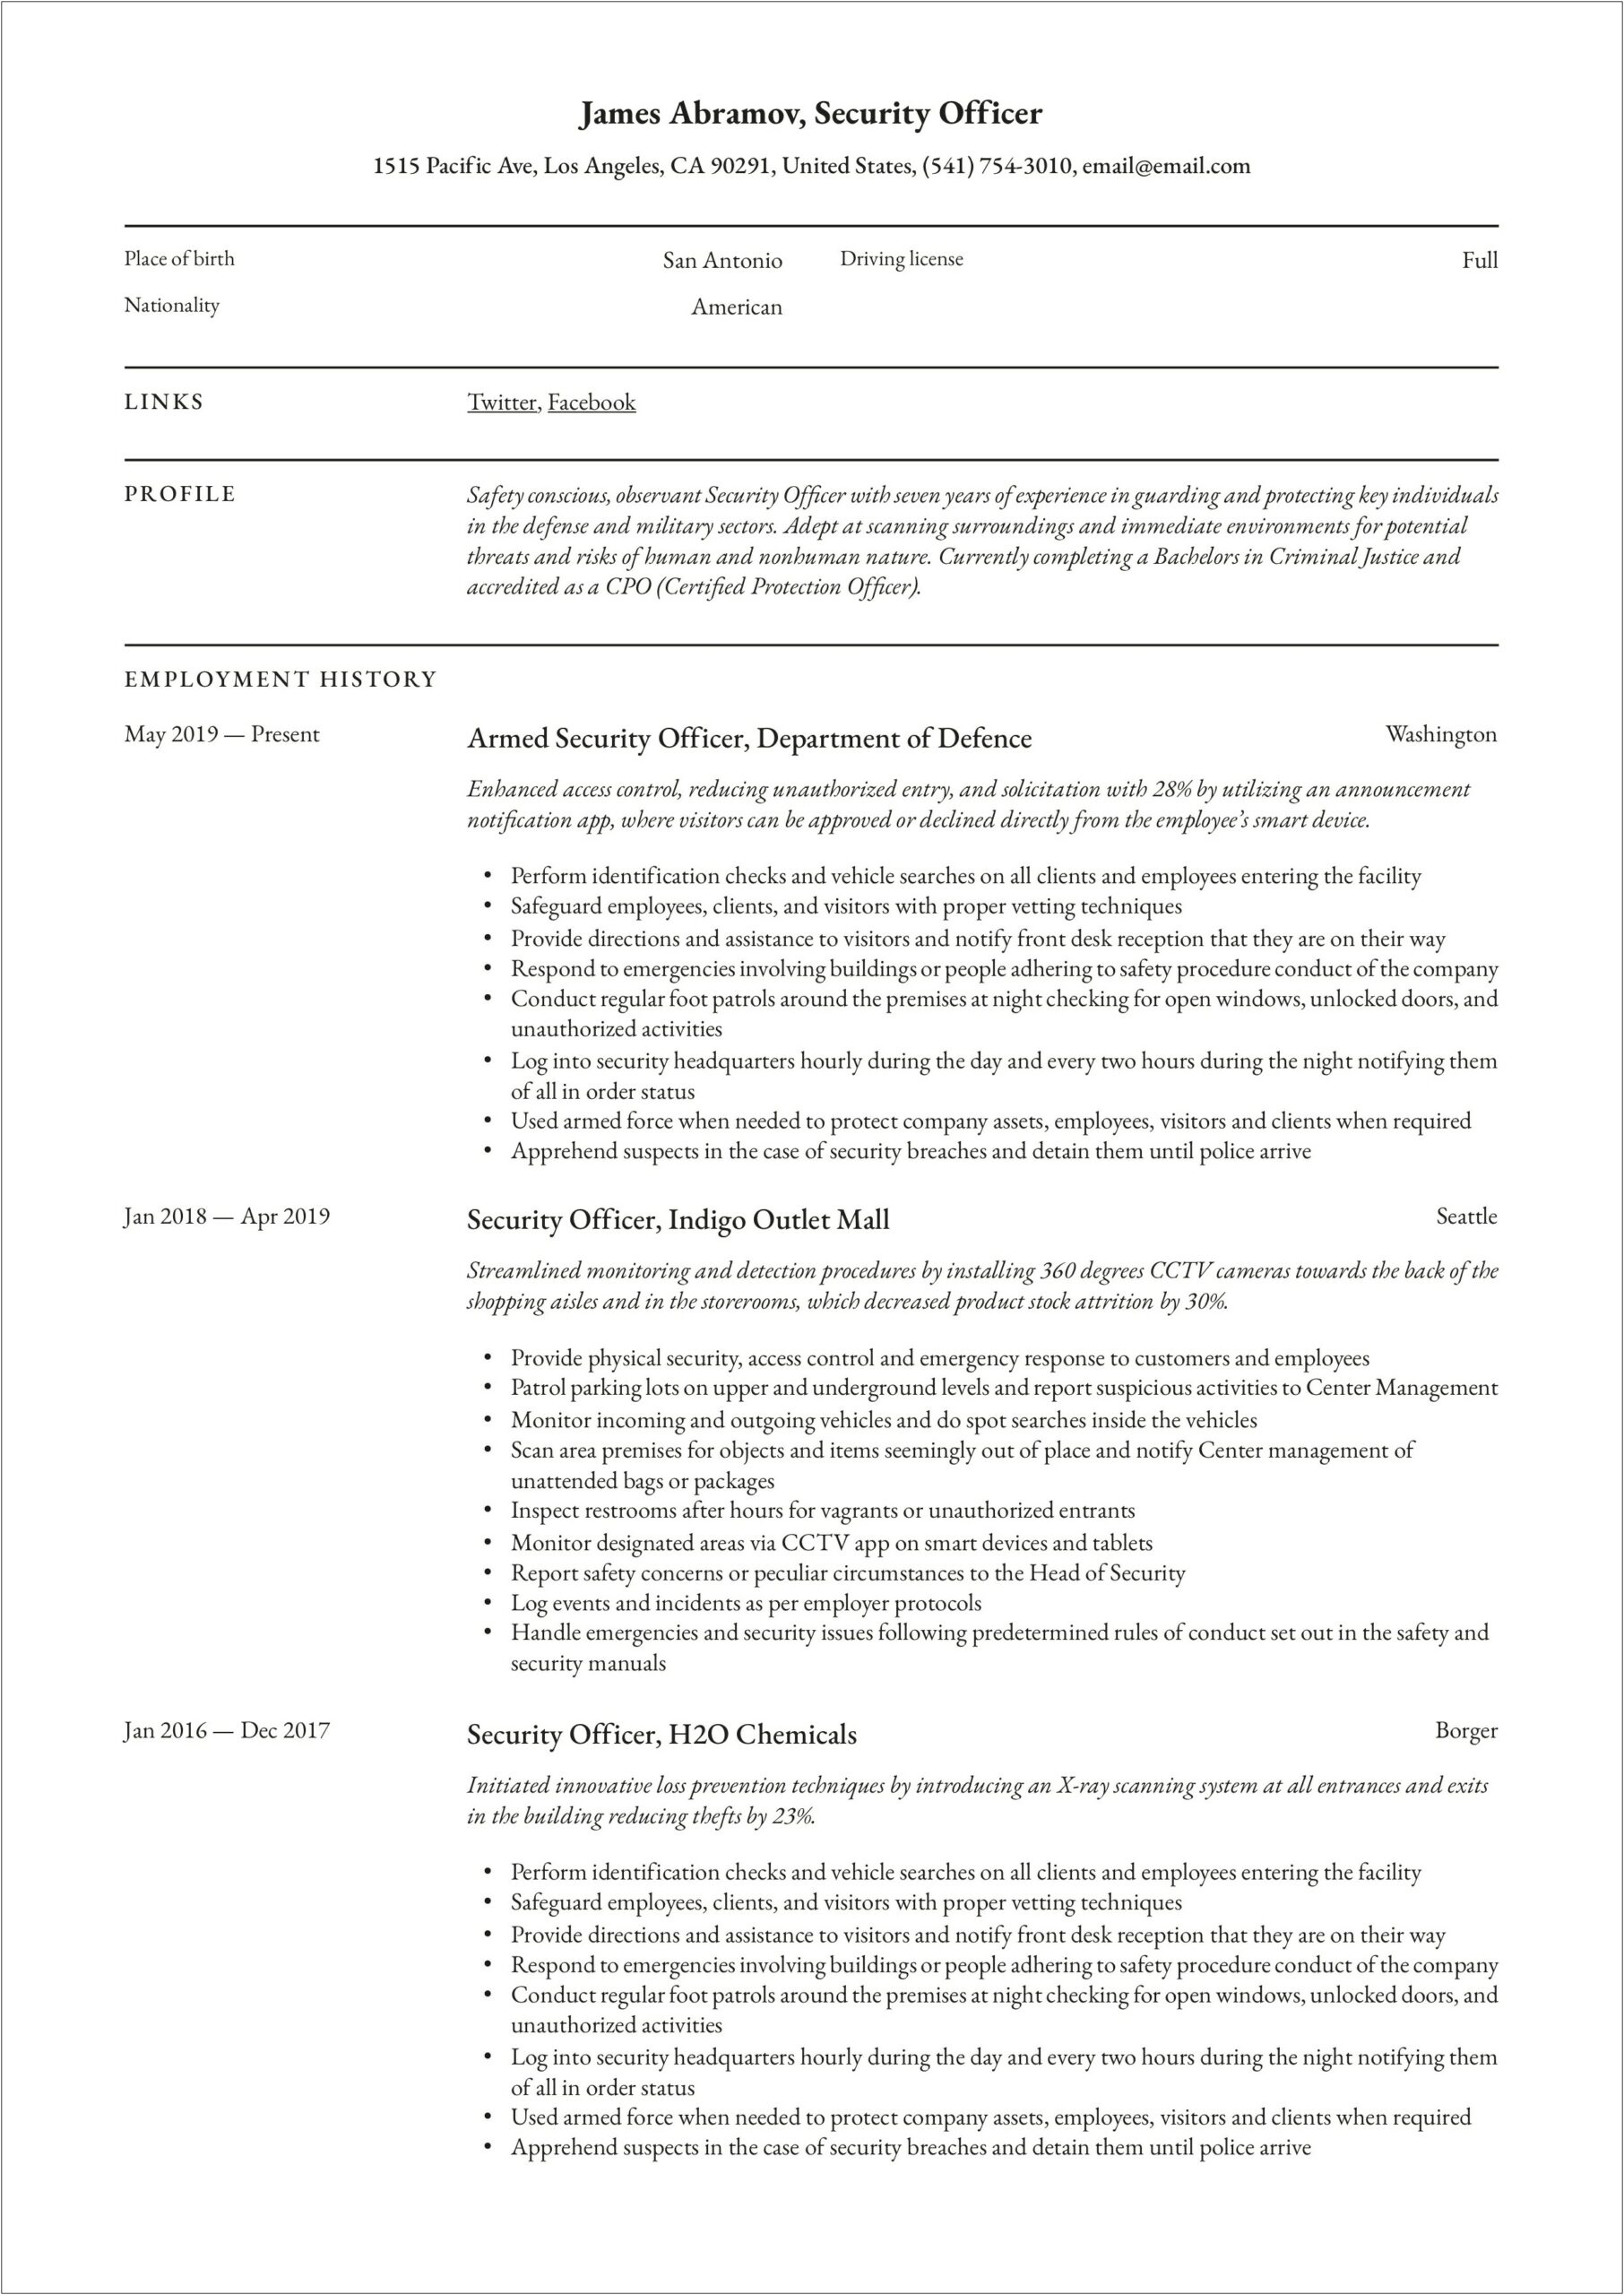 Access Control Officer Resume Example